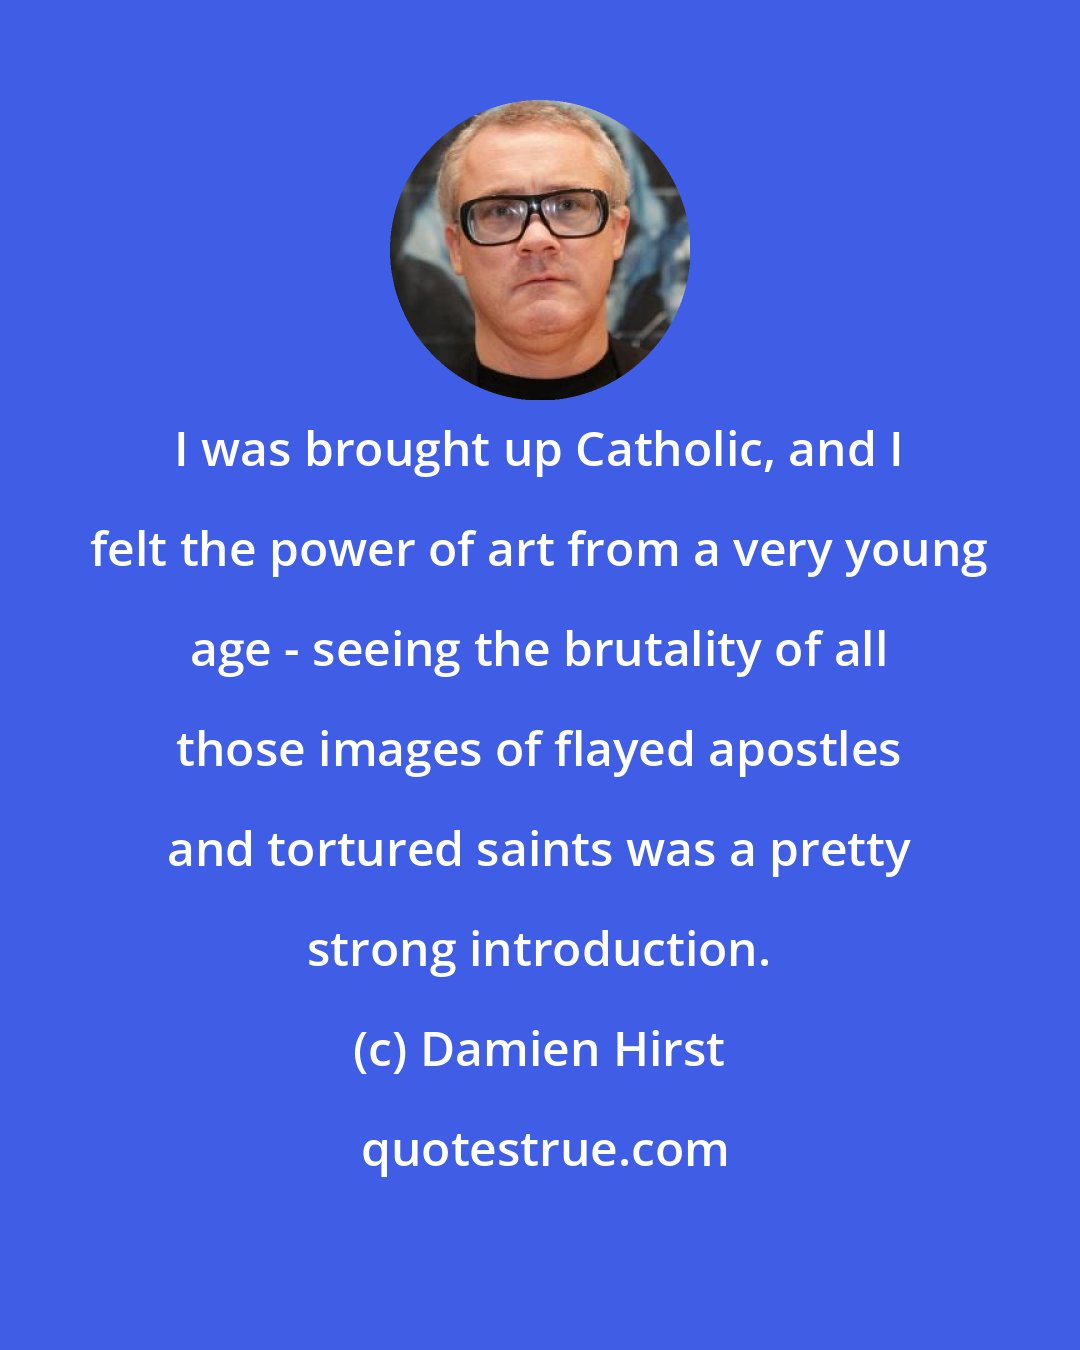 Damien Hirst: I was brought up Catholic, and I felt the power of art from a very young age - seeing the brutality of all those images of flayed apostles and tortured saints was a pretty strong introduction.